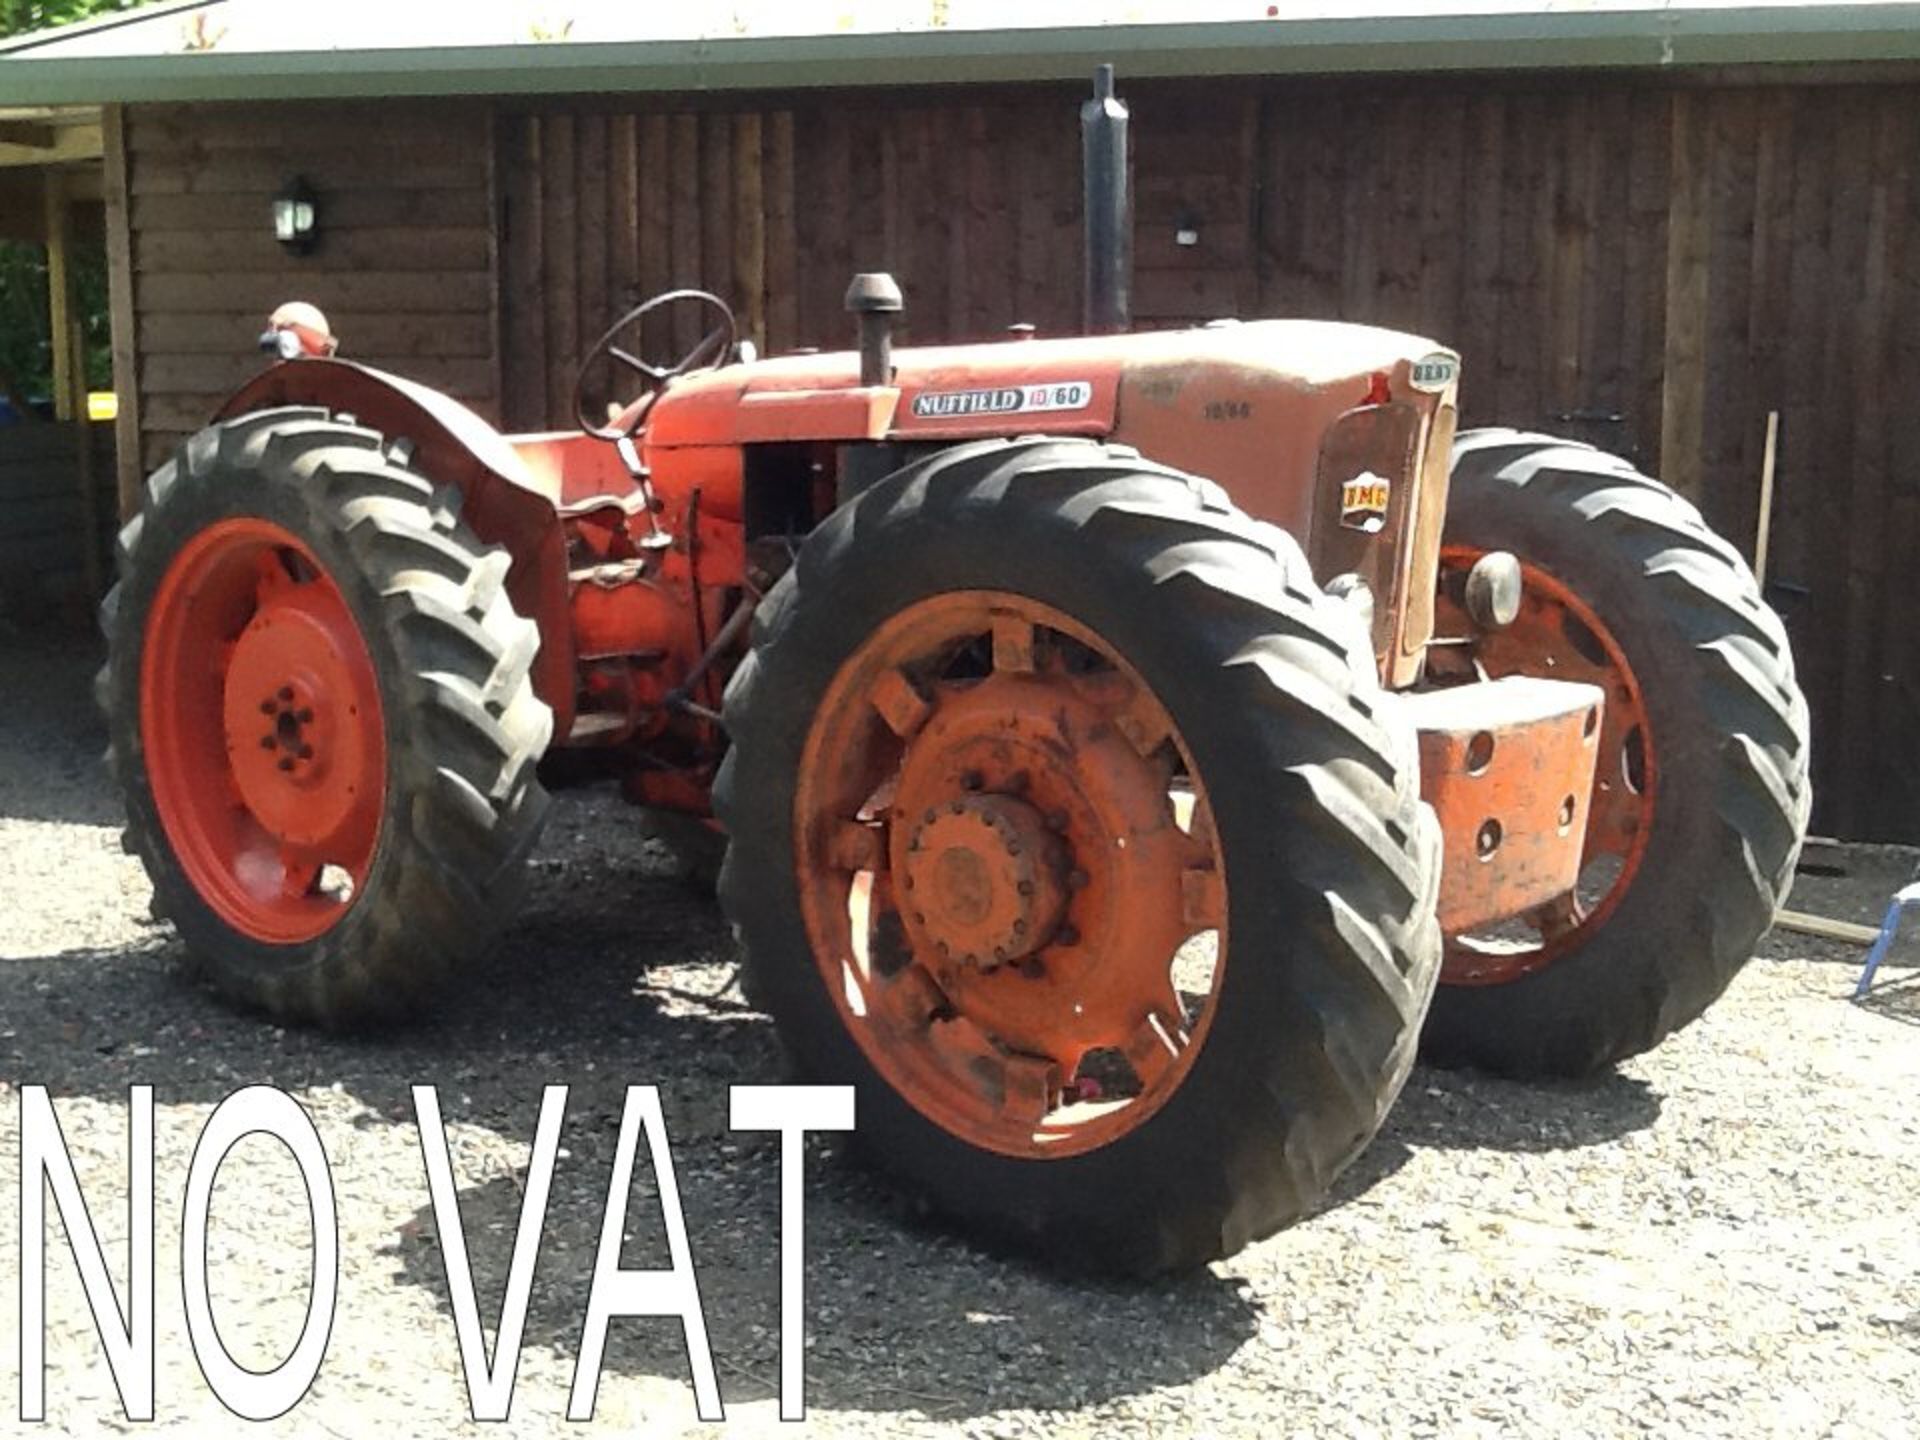 1967 NUFFIELD BRAY 10/60 4cylinder diesel TRACTOR Serial No: 60N/685473 Fitted with a Bray 4x4 front - Image 2 of 2